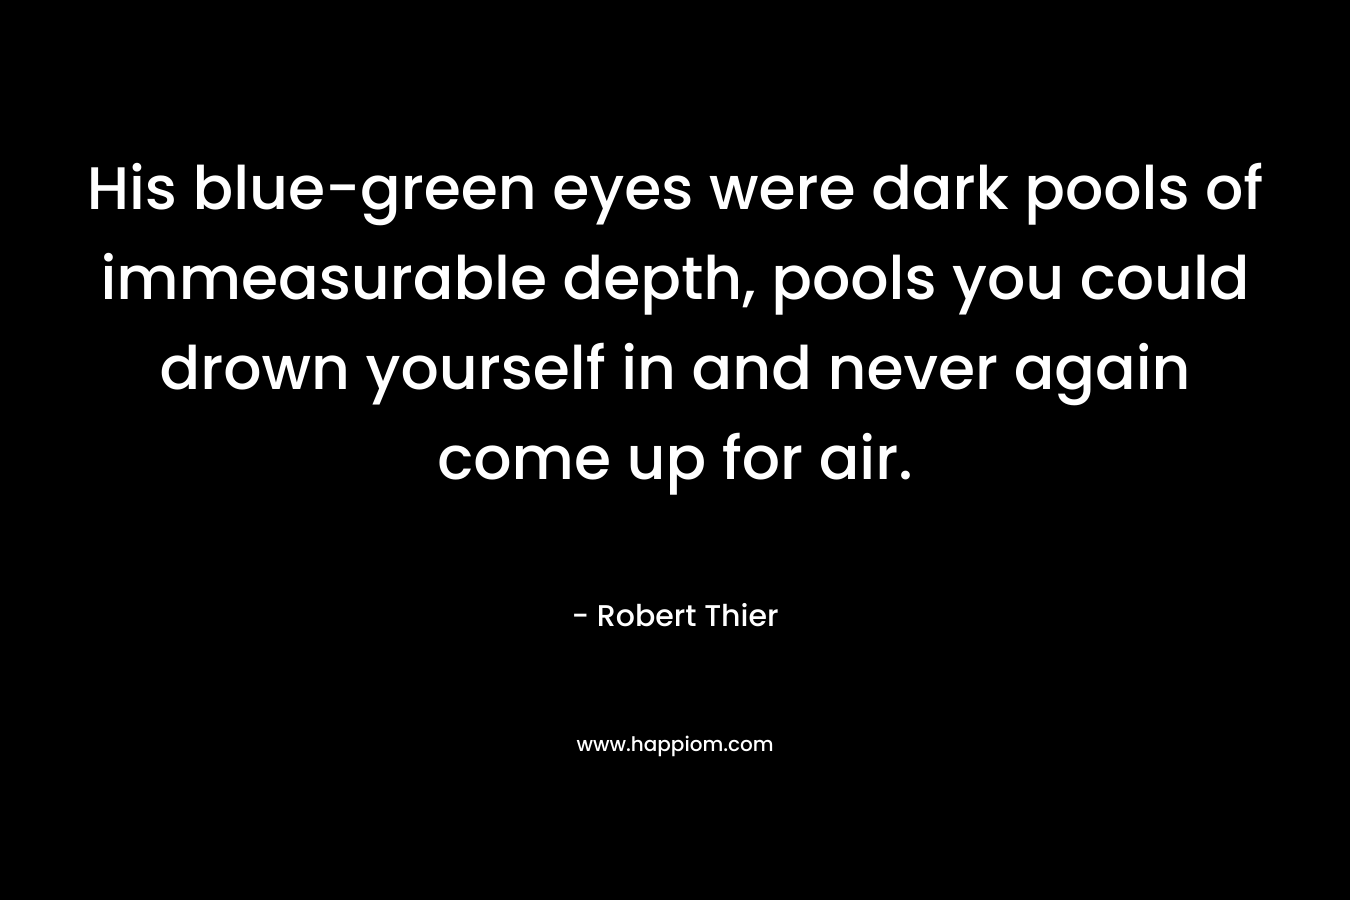 His blue-green eyes were dark pools of immeasurable depth, pools you could drown yourself in and never again come up for air. – Robert Thier